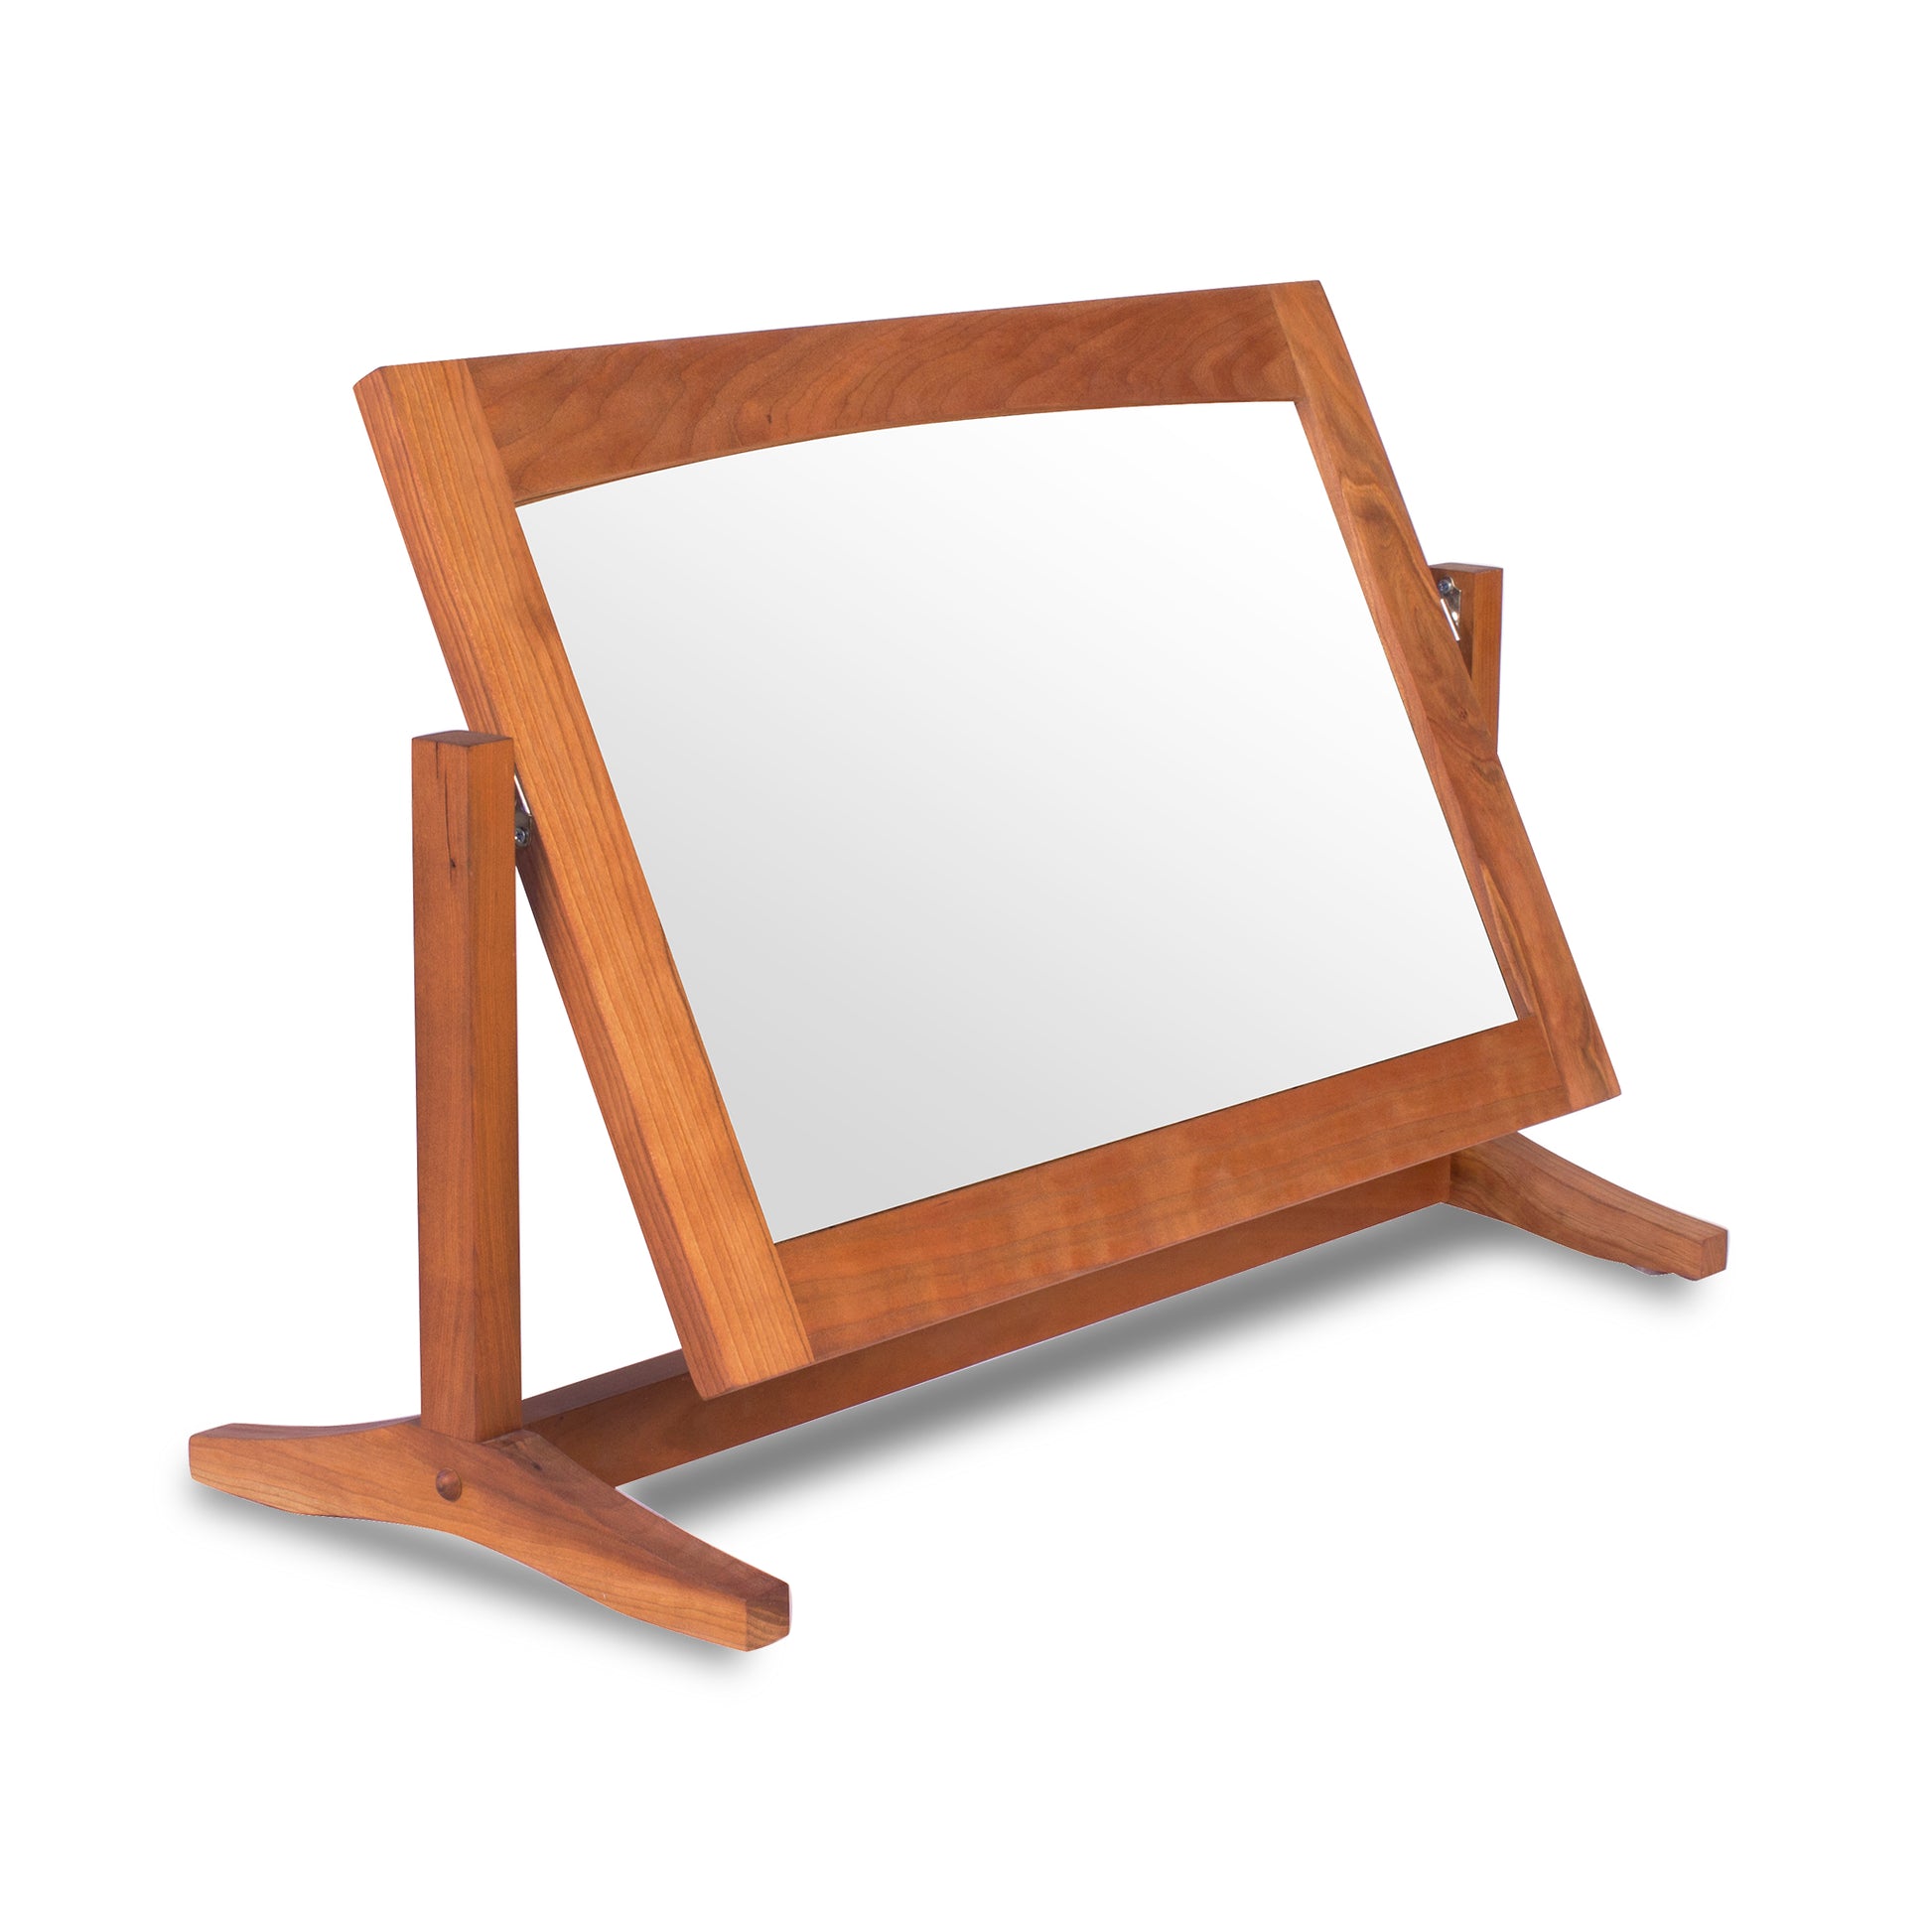 A handcrafted wooden stand with the Lyndon Furniture New England Shaker Adjustable Dresser Mirror.